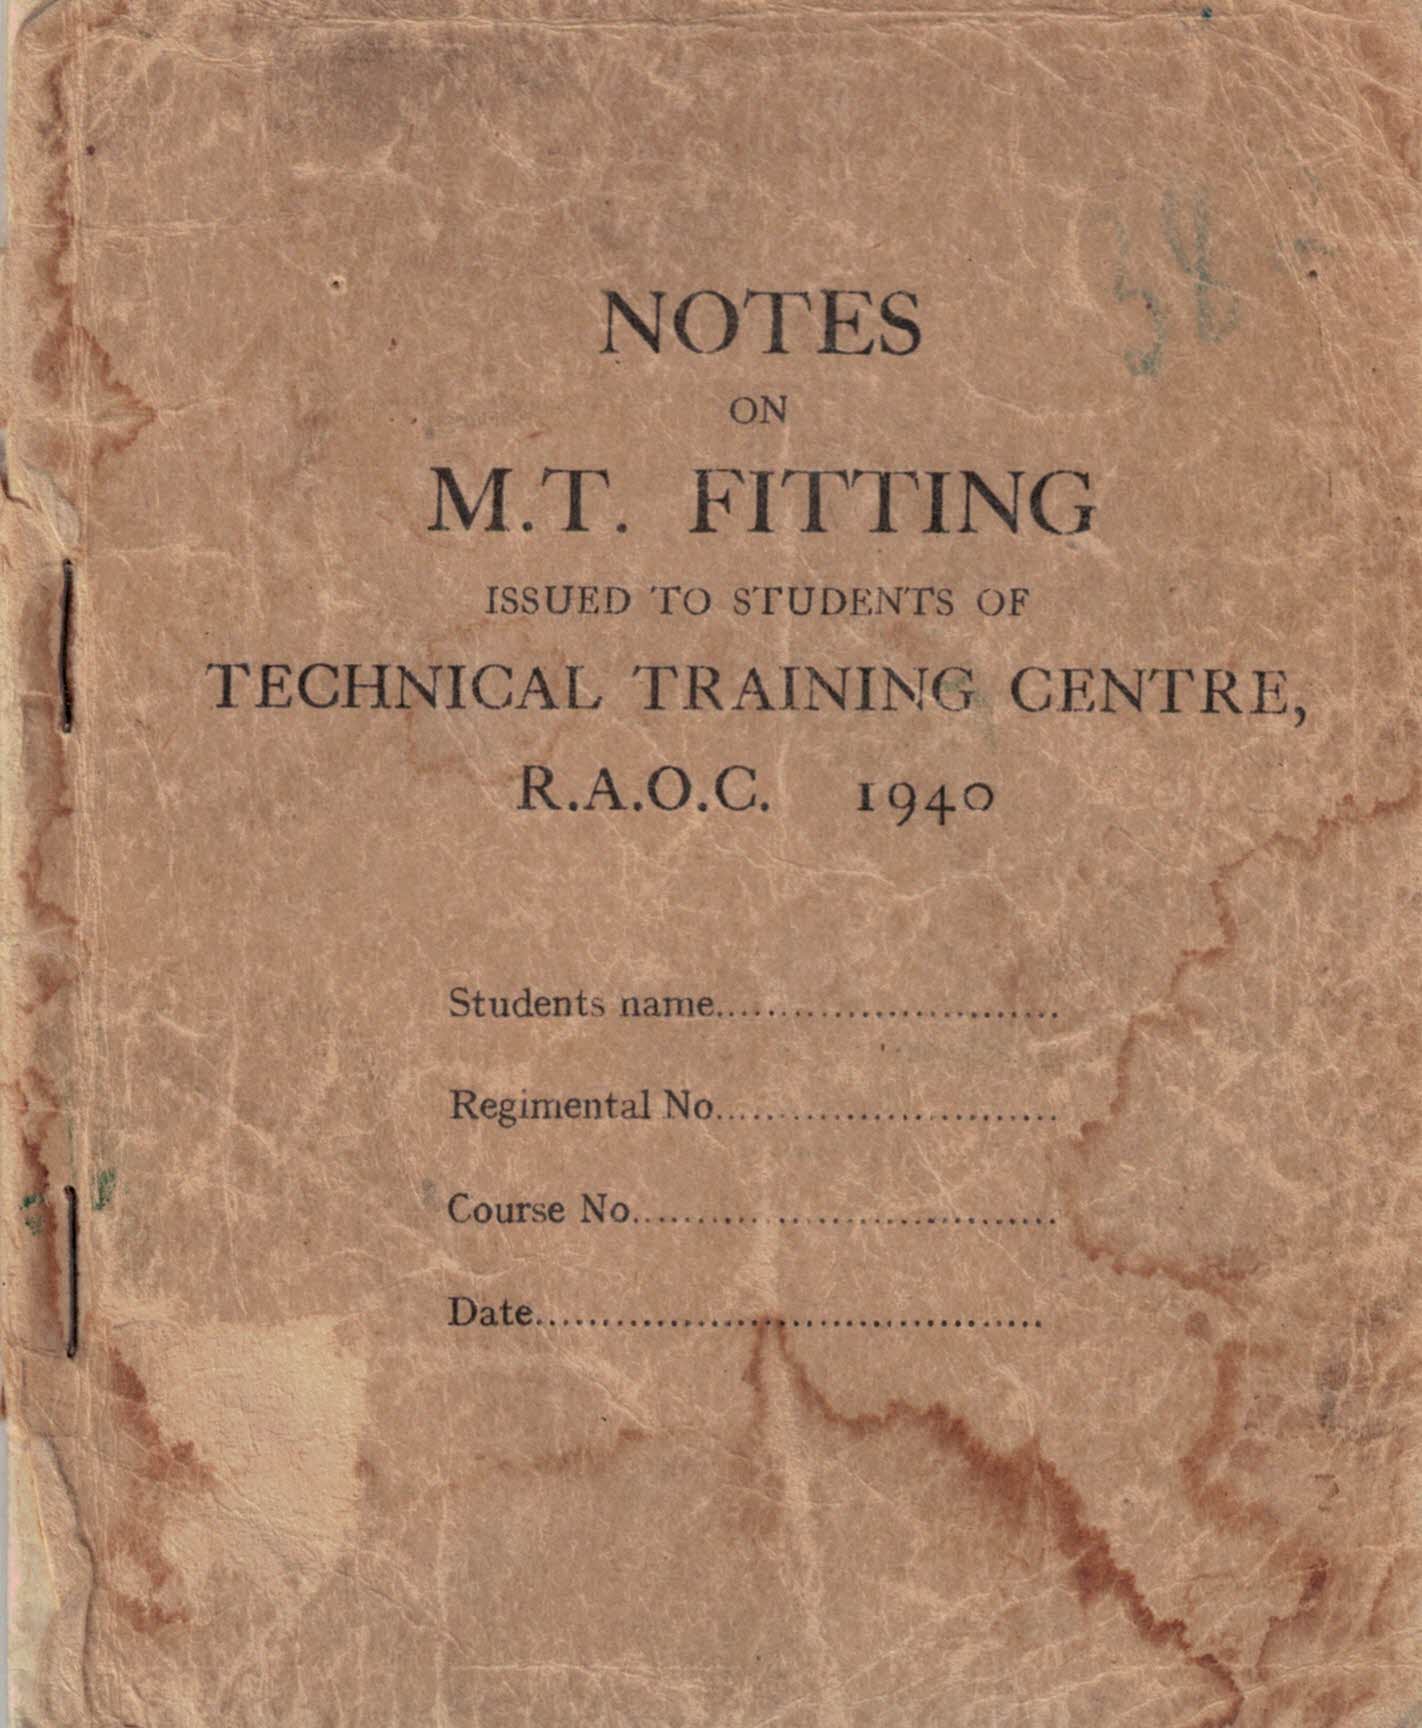 Notes on M.T. Fitting. Issued to Students of Technical Training Centre, R.A.O.C. 1940.